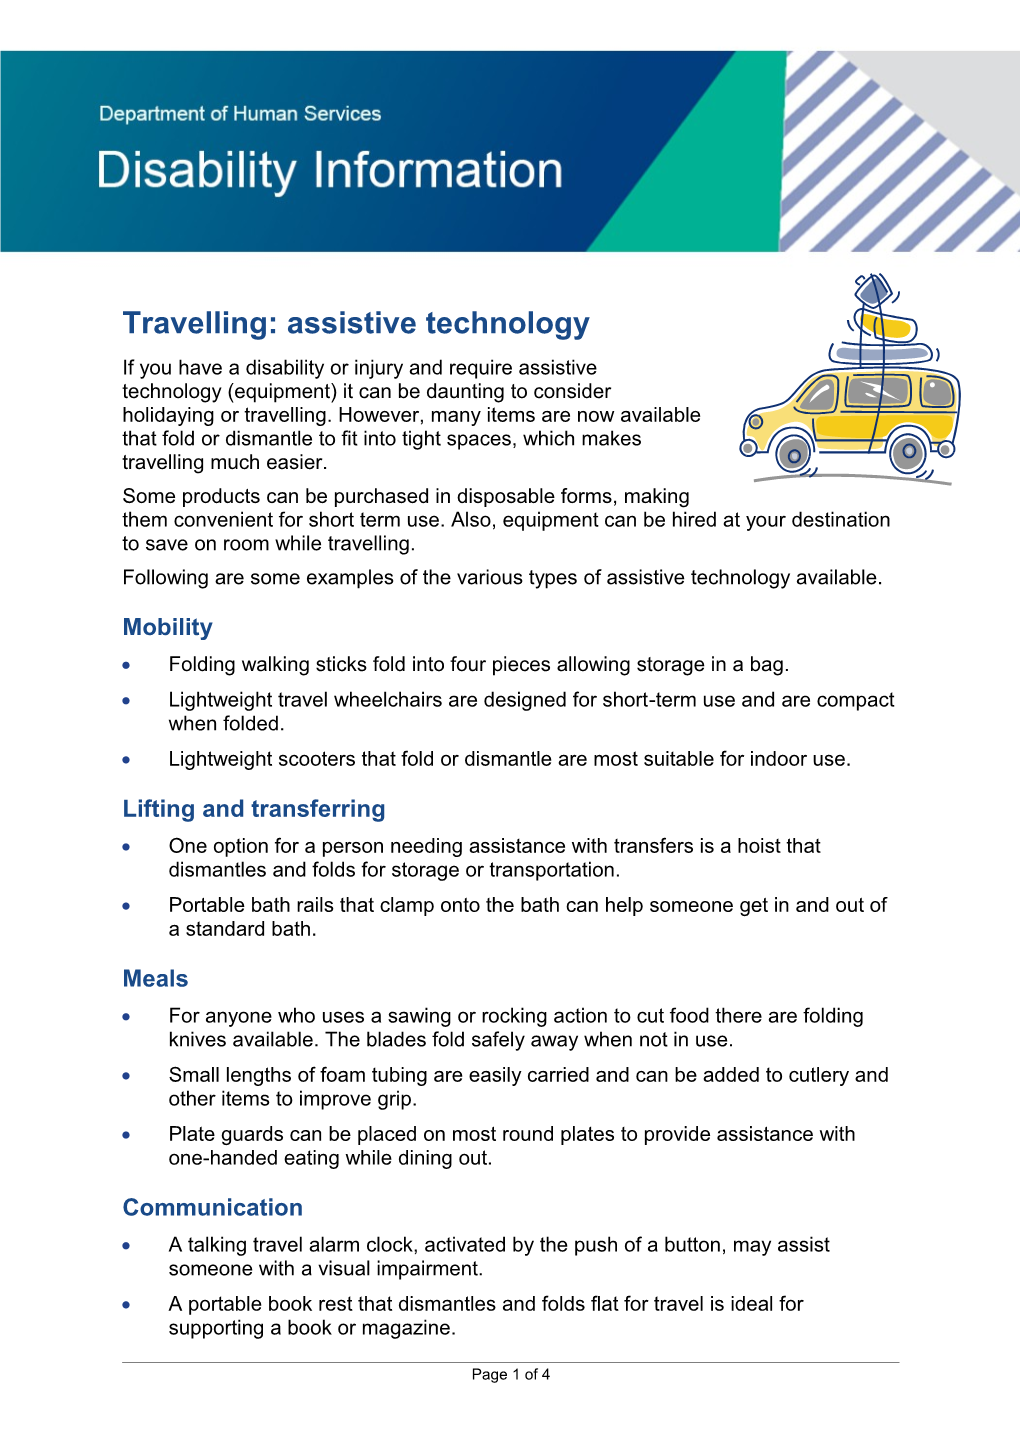 Travelling: Assistive Technology